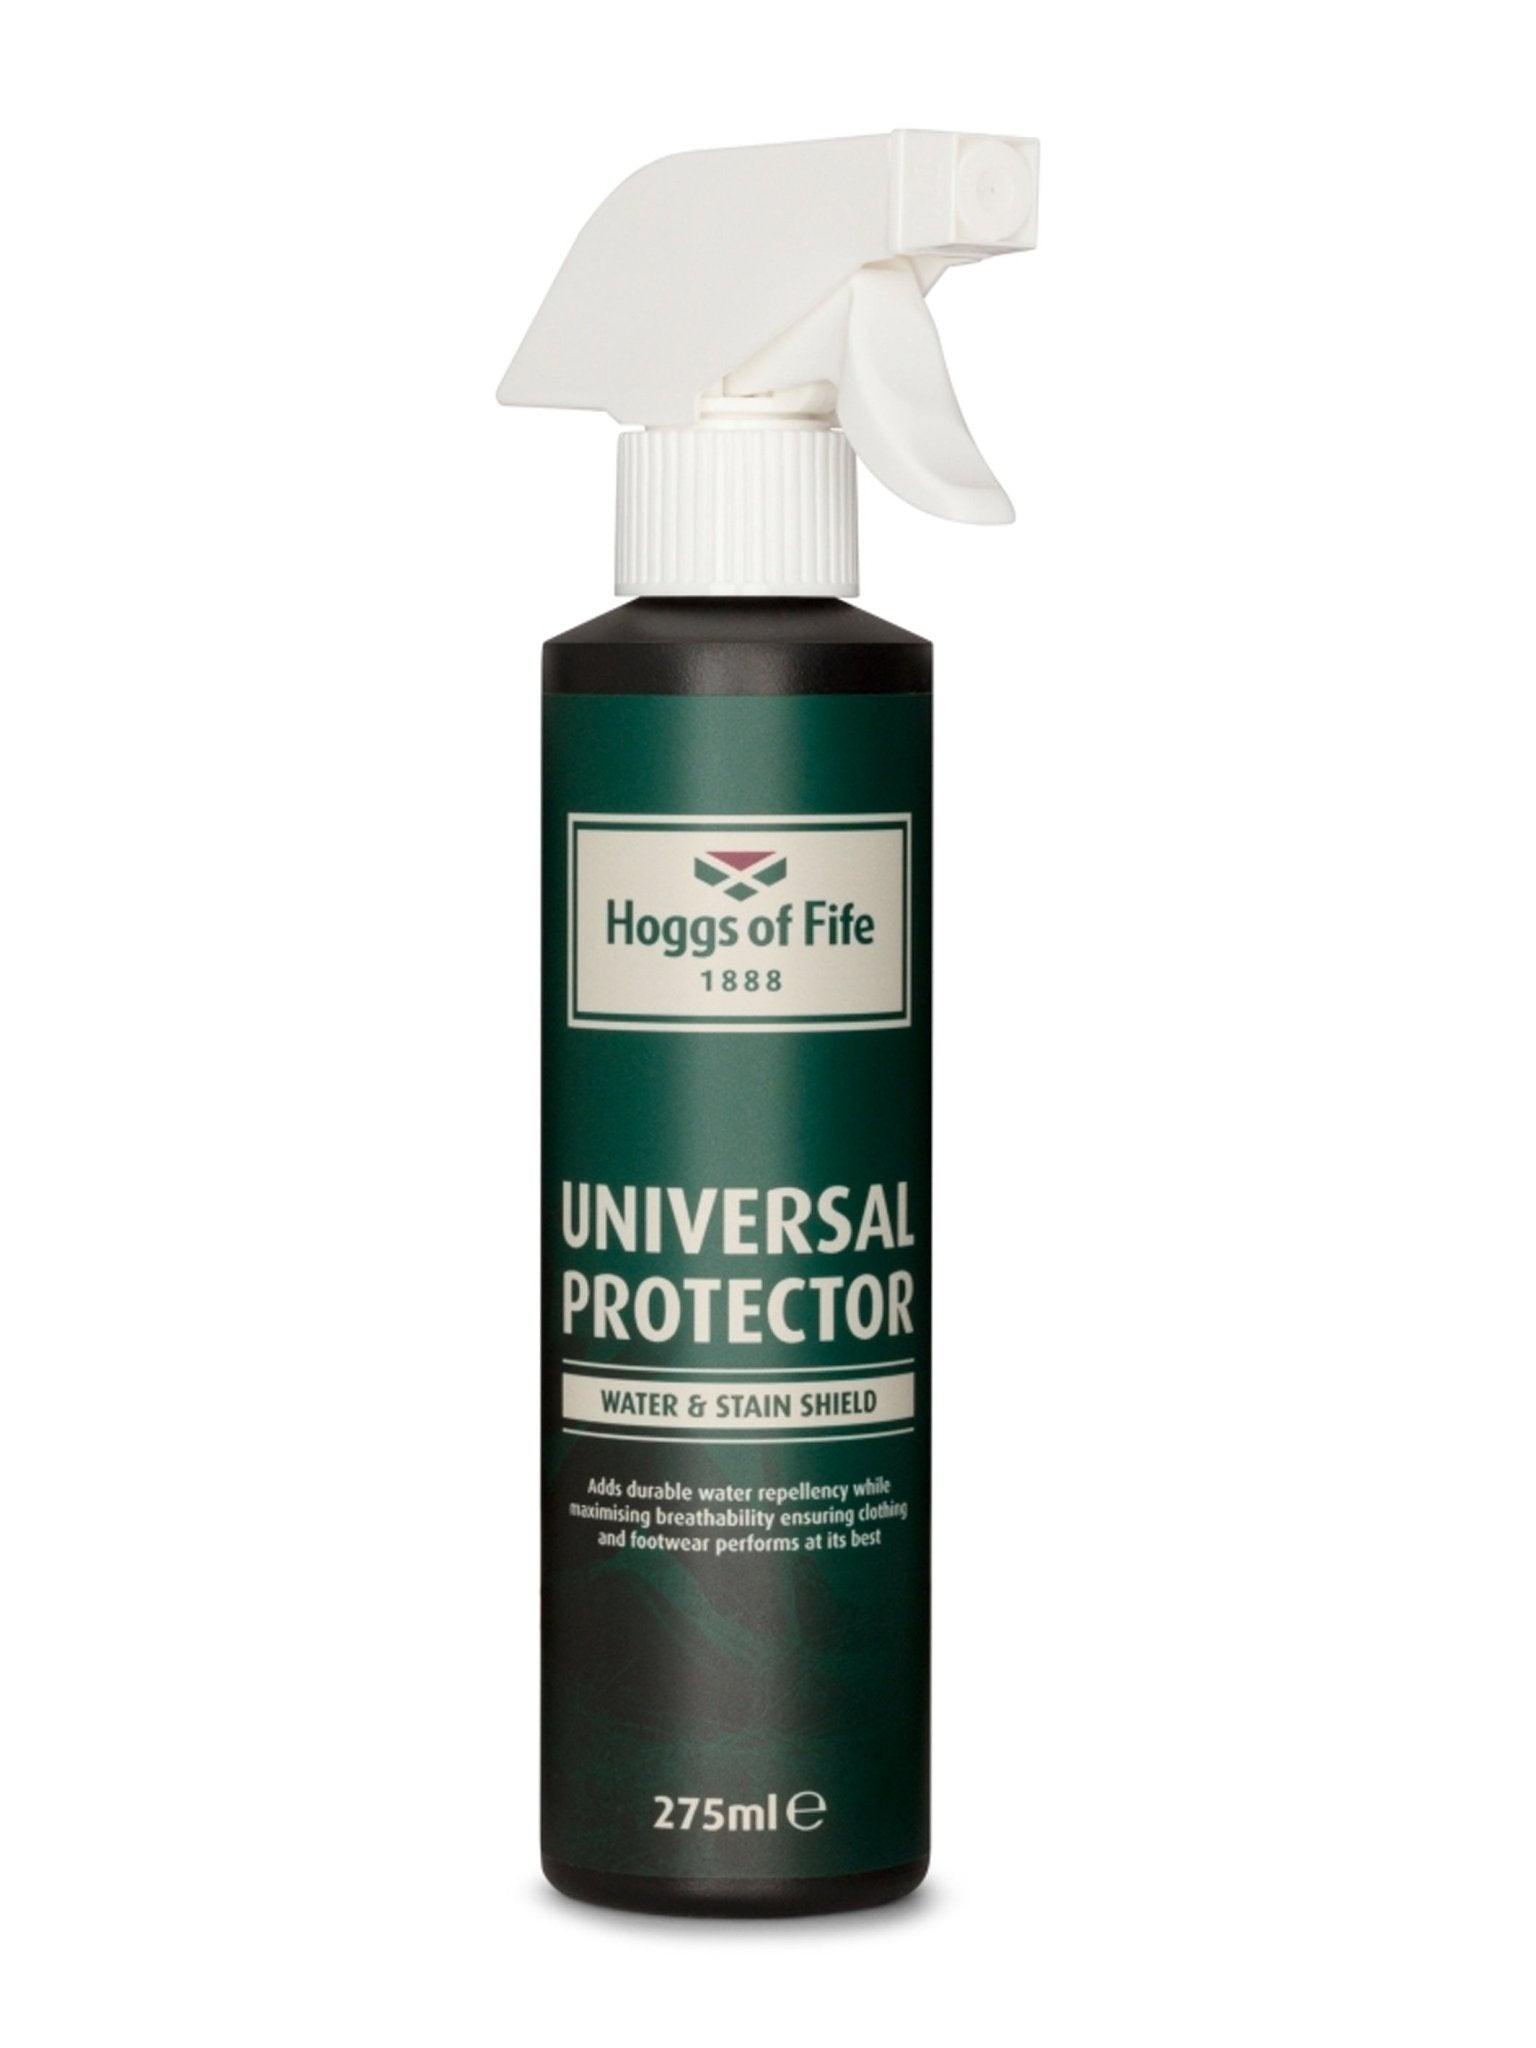 Hoggs of Fife Hoggs of Fife - Universal Protector - water repellency and stain shield Spray - 275ml Shoe & Clothing Care